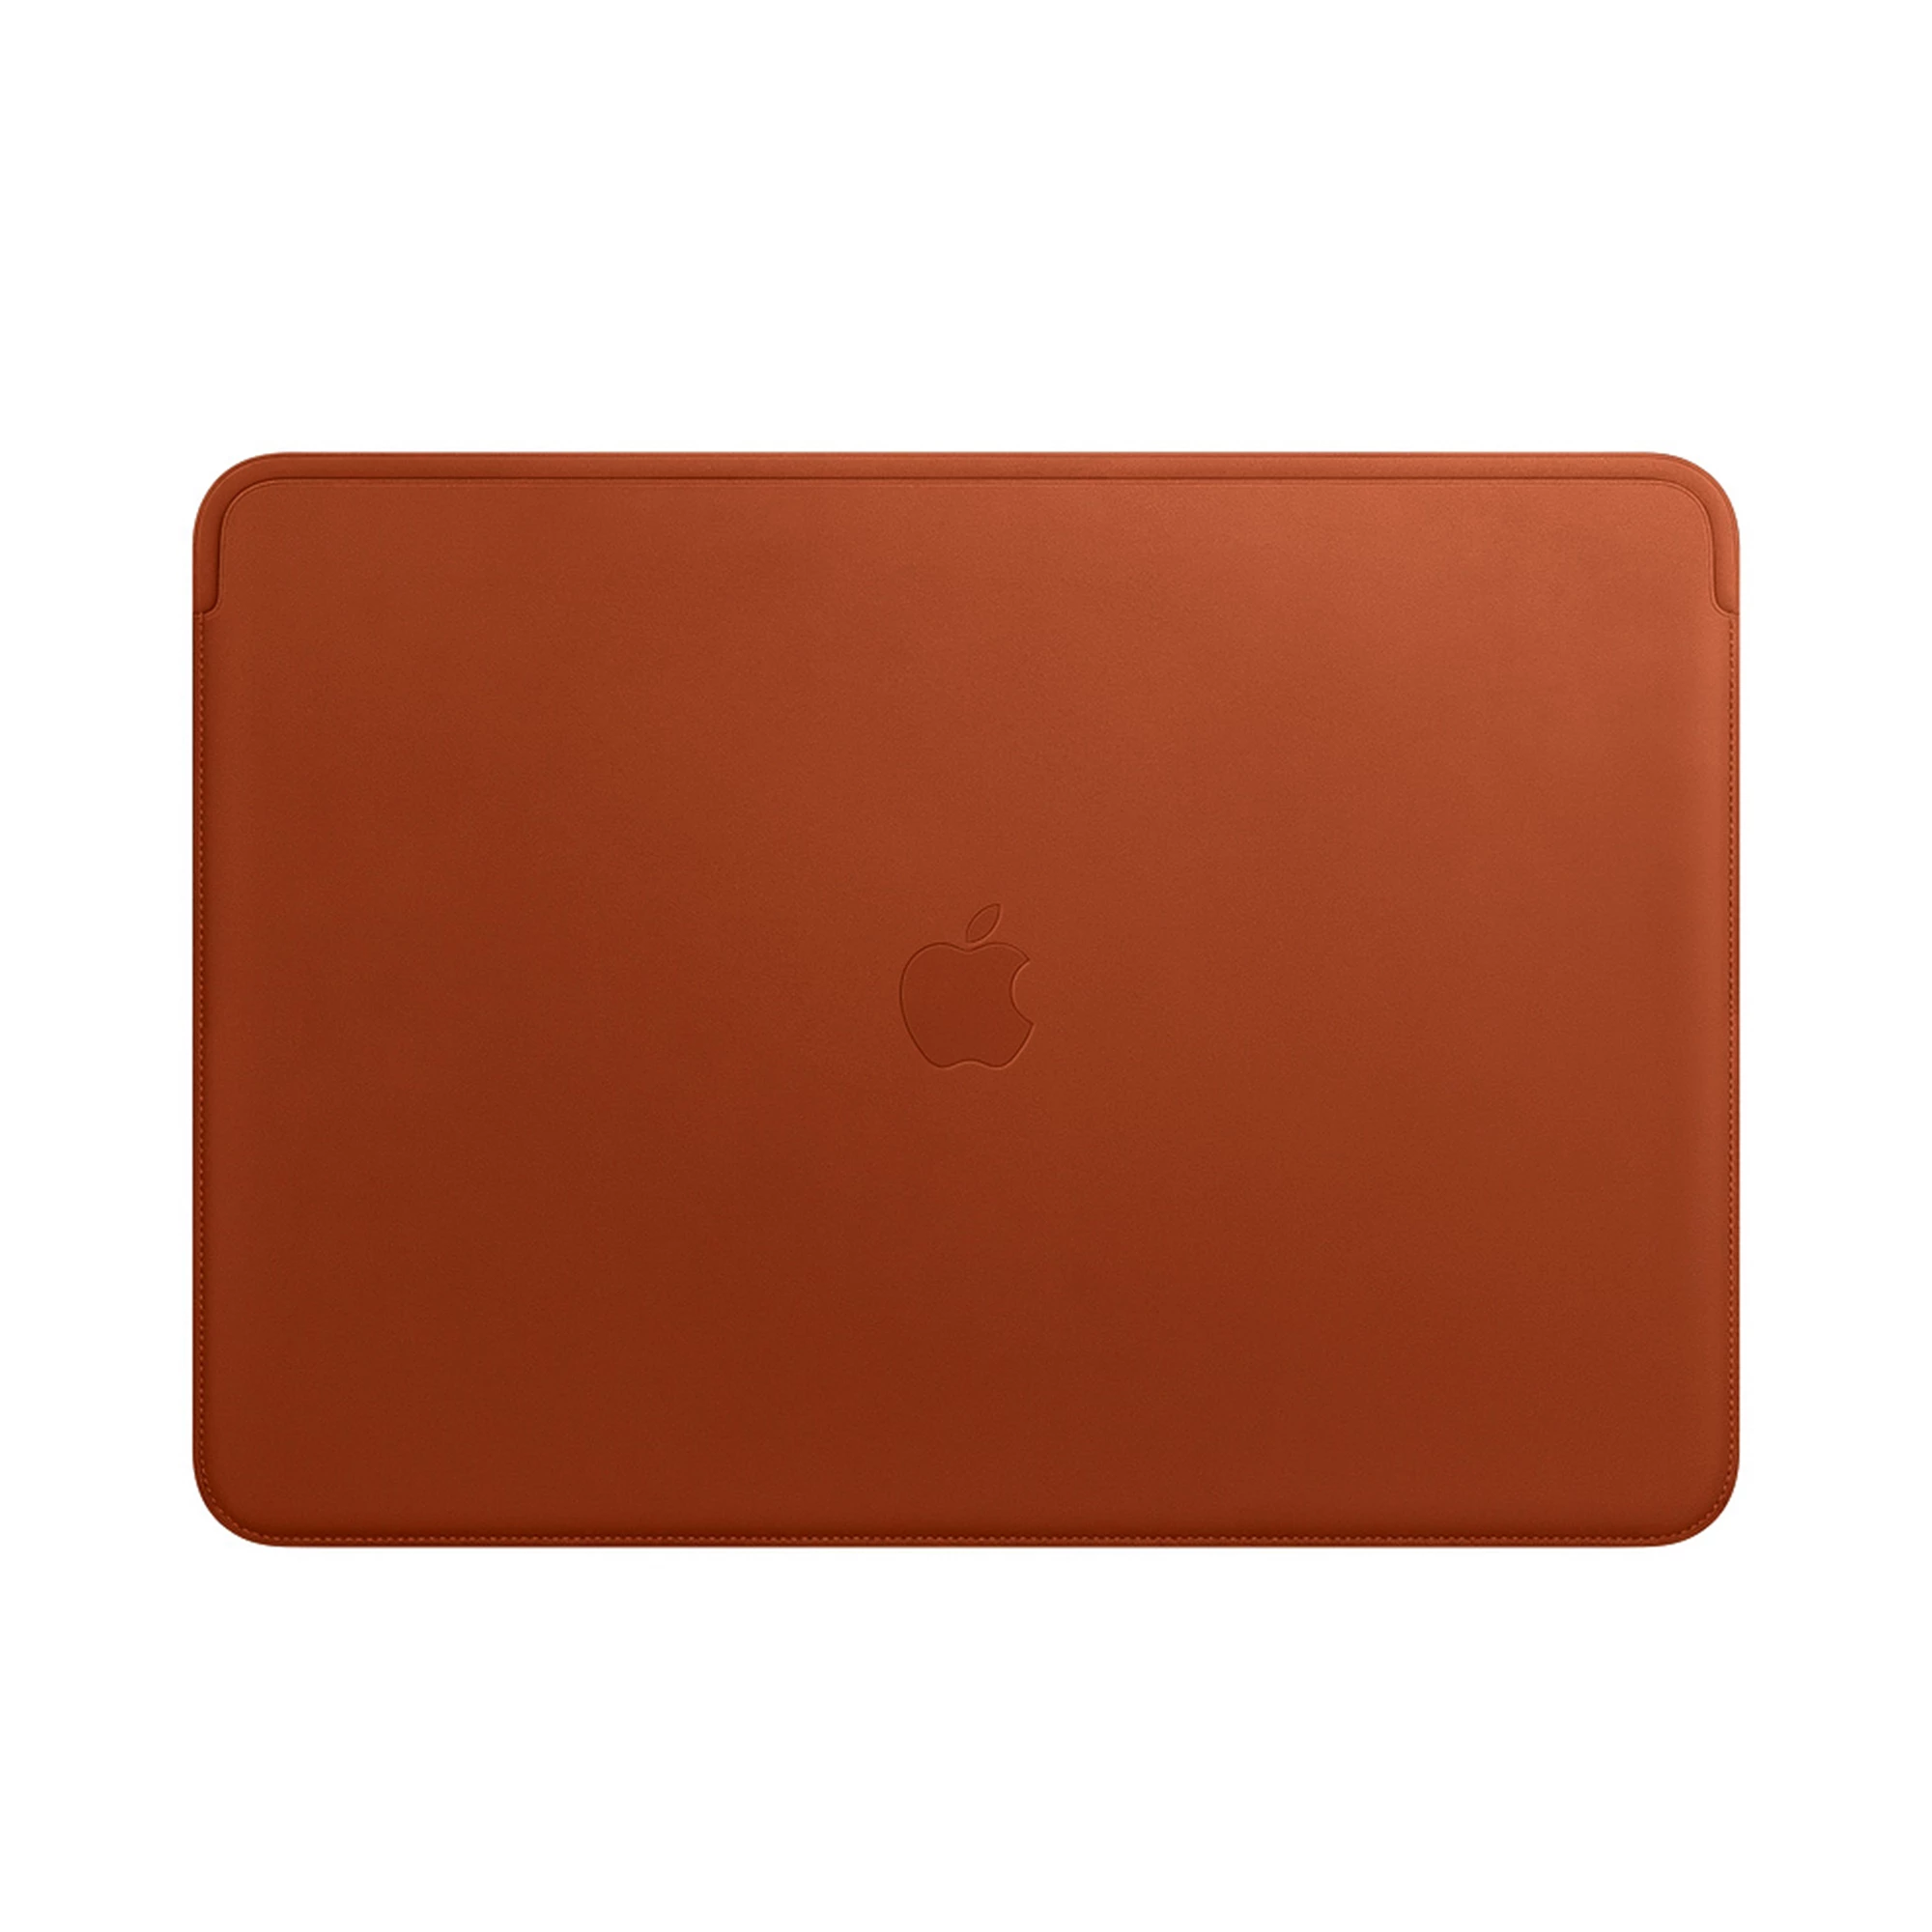 Apple Leather Sleeve for 15" MacBook Pro - Saddle Brown (MRQV2)